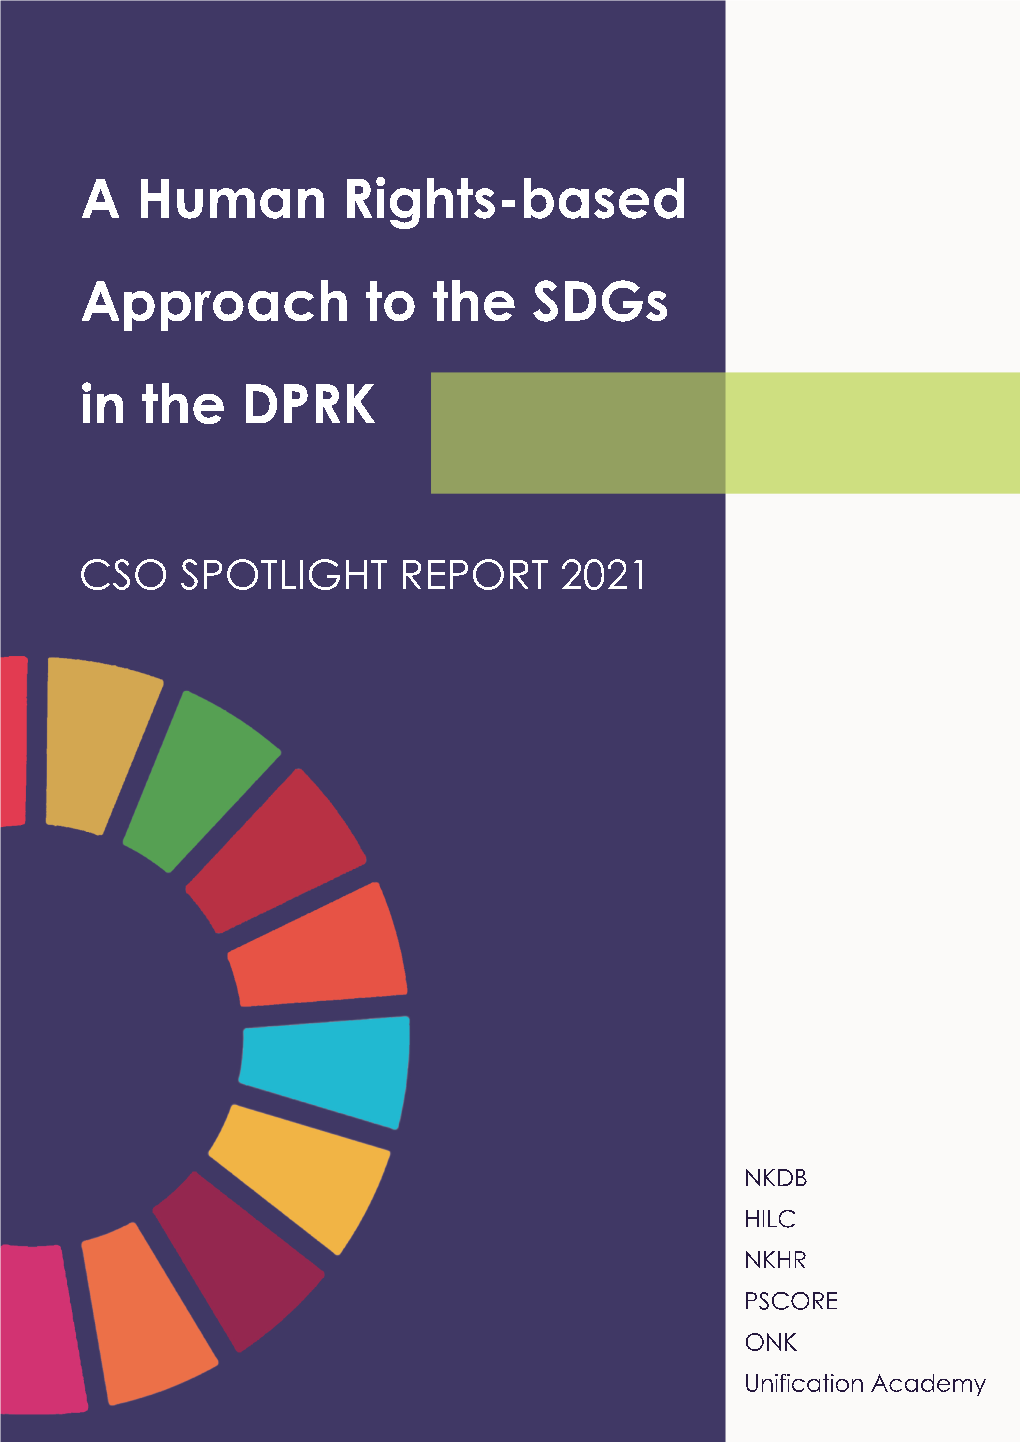 A Human Rights-Based Approach to the Sdgs in the DPRK